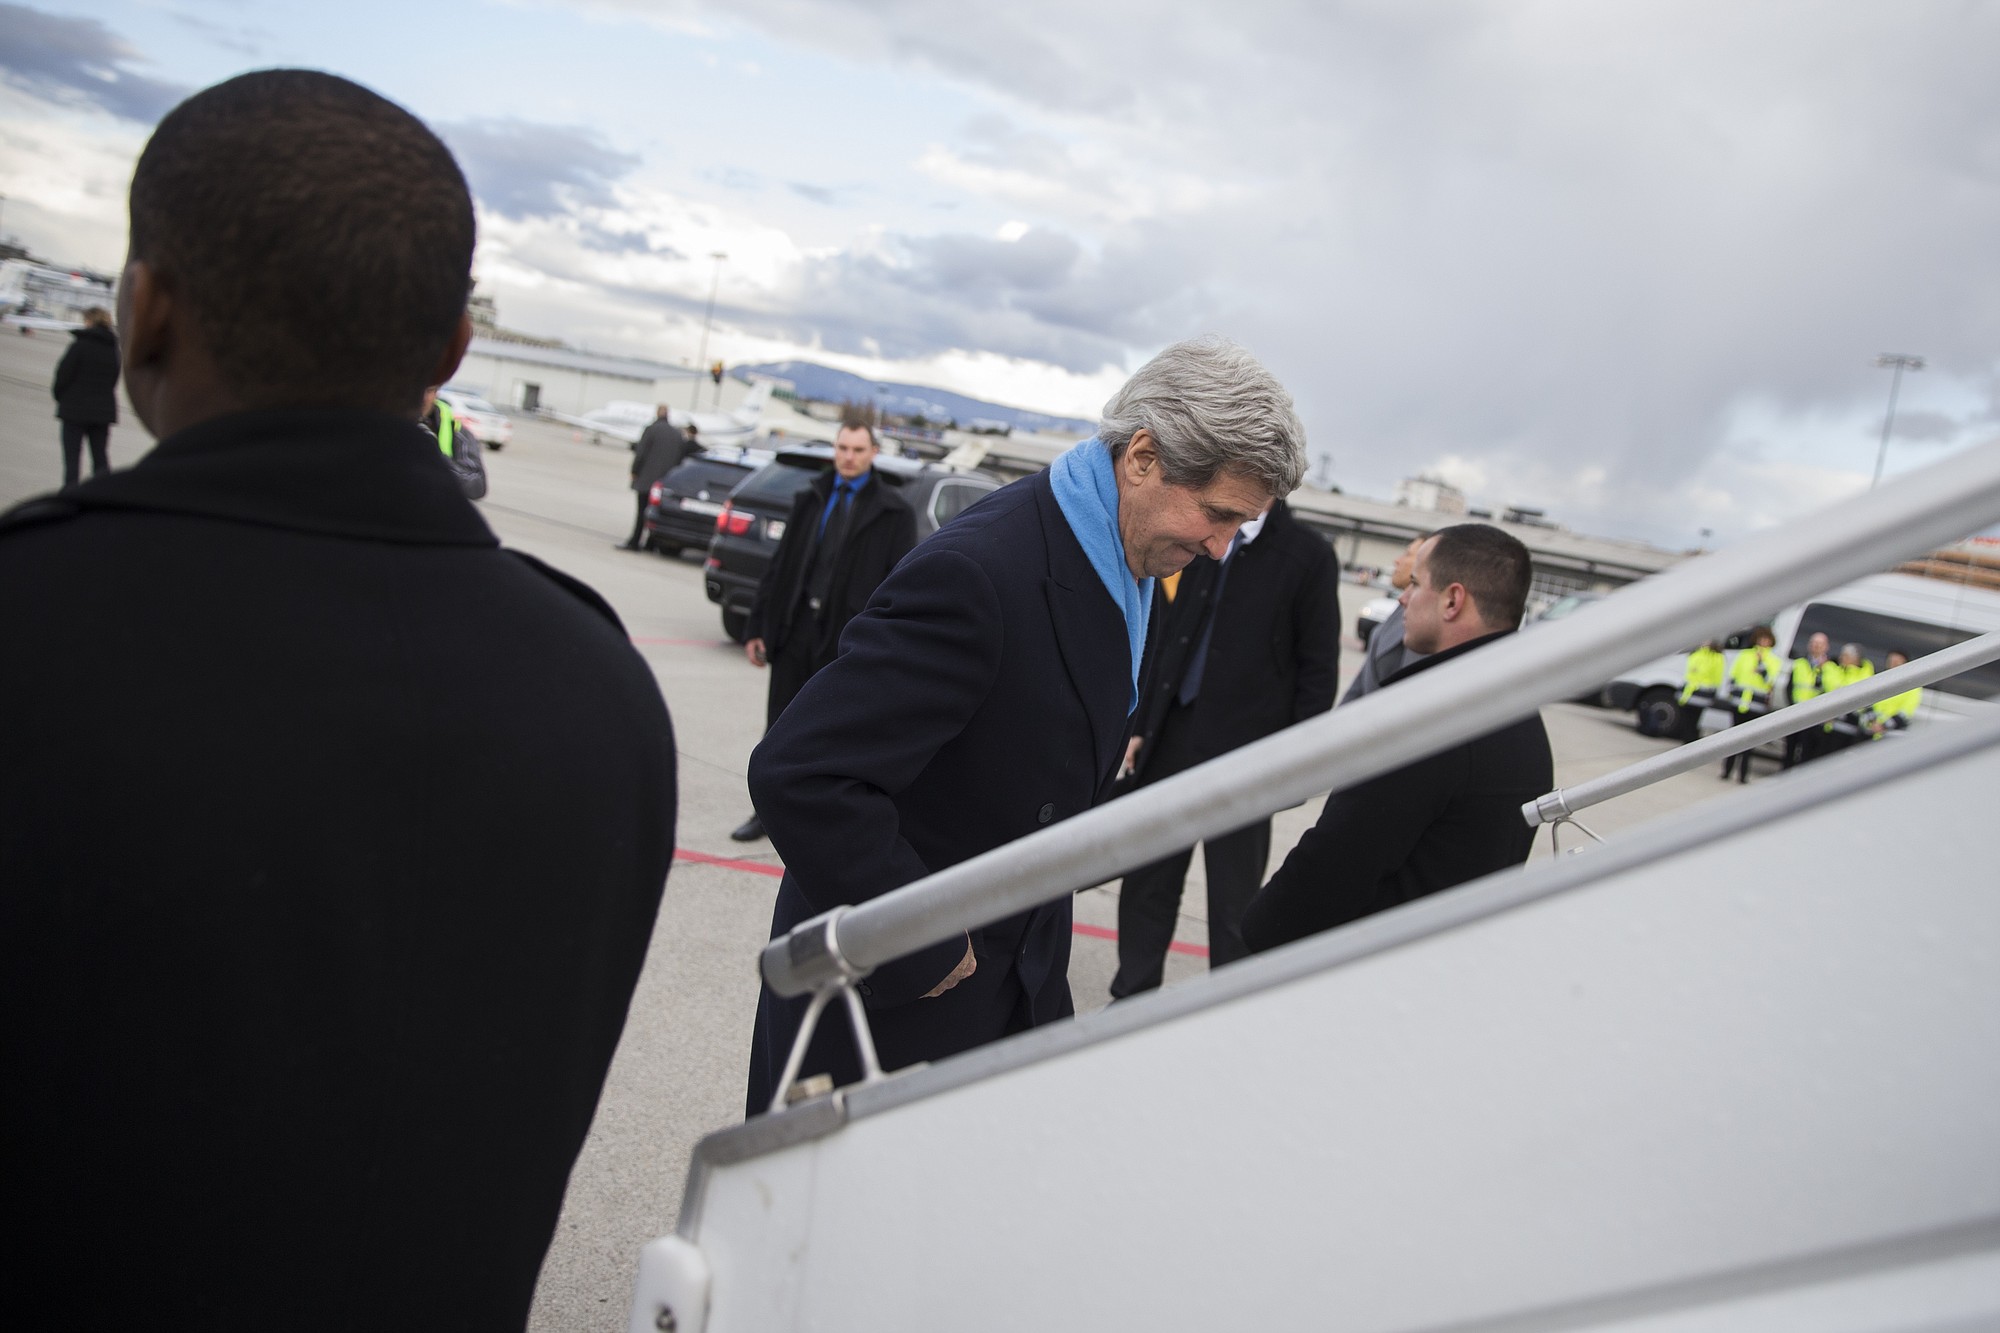 Secretary of State John Kerry boards a plane at the conclusion of another round of nuclear negotiations with Iranian Foreign Minister Mohammad Javad Zarif, on Wednesday in Geneva, Switzerland.